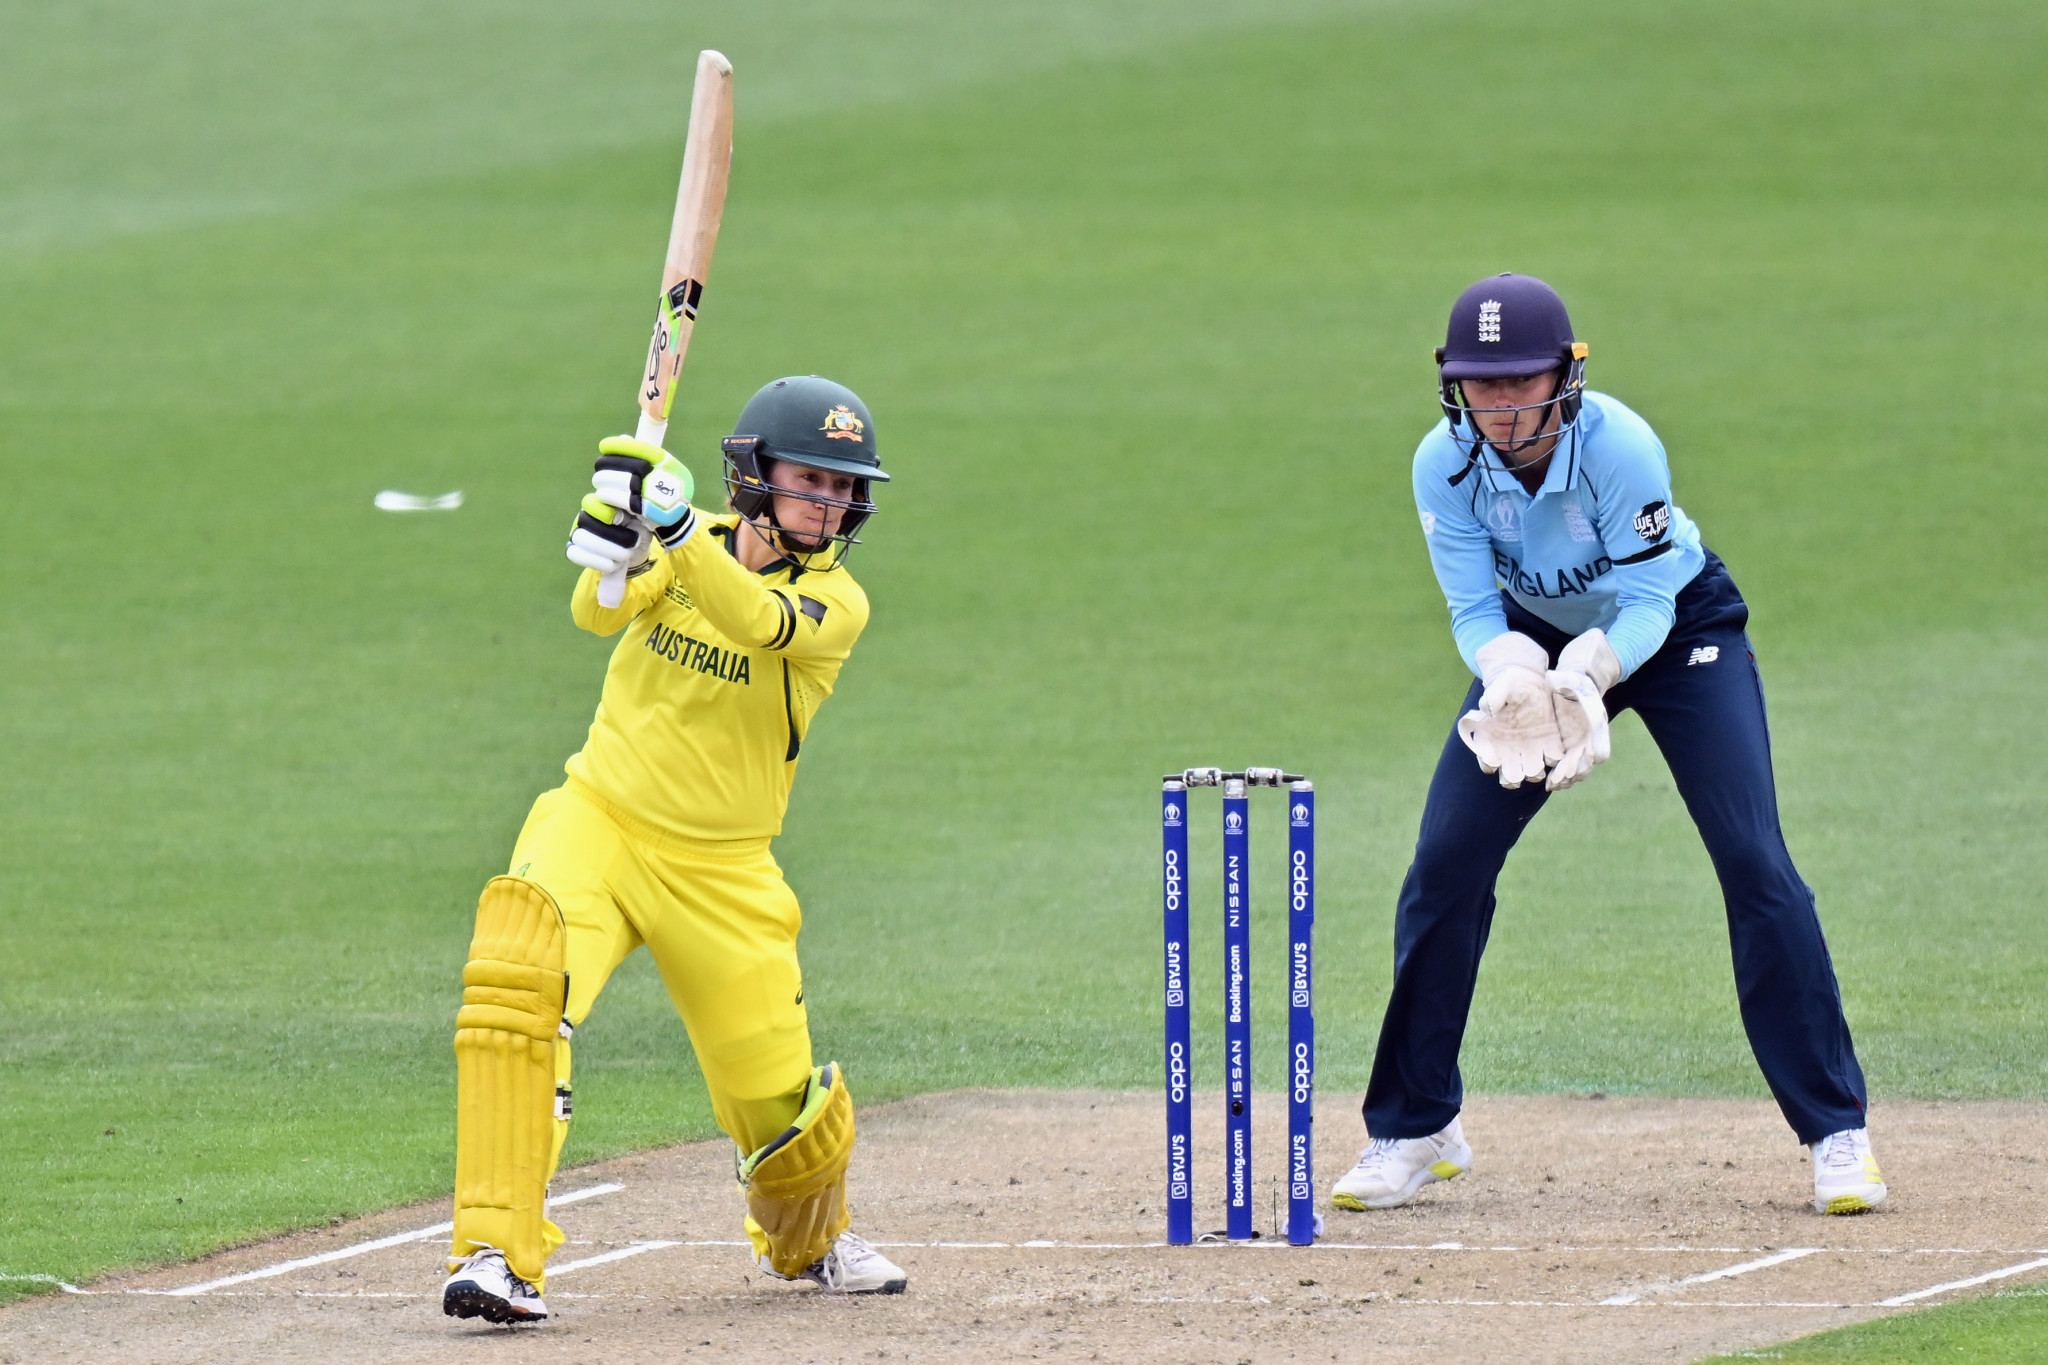 Defending champions England narrowly beaten by Australia in Women's Cricket World Cup thriller